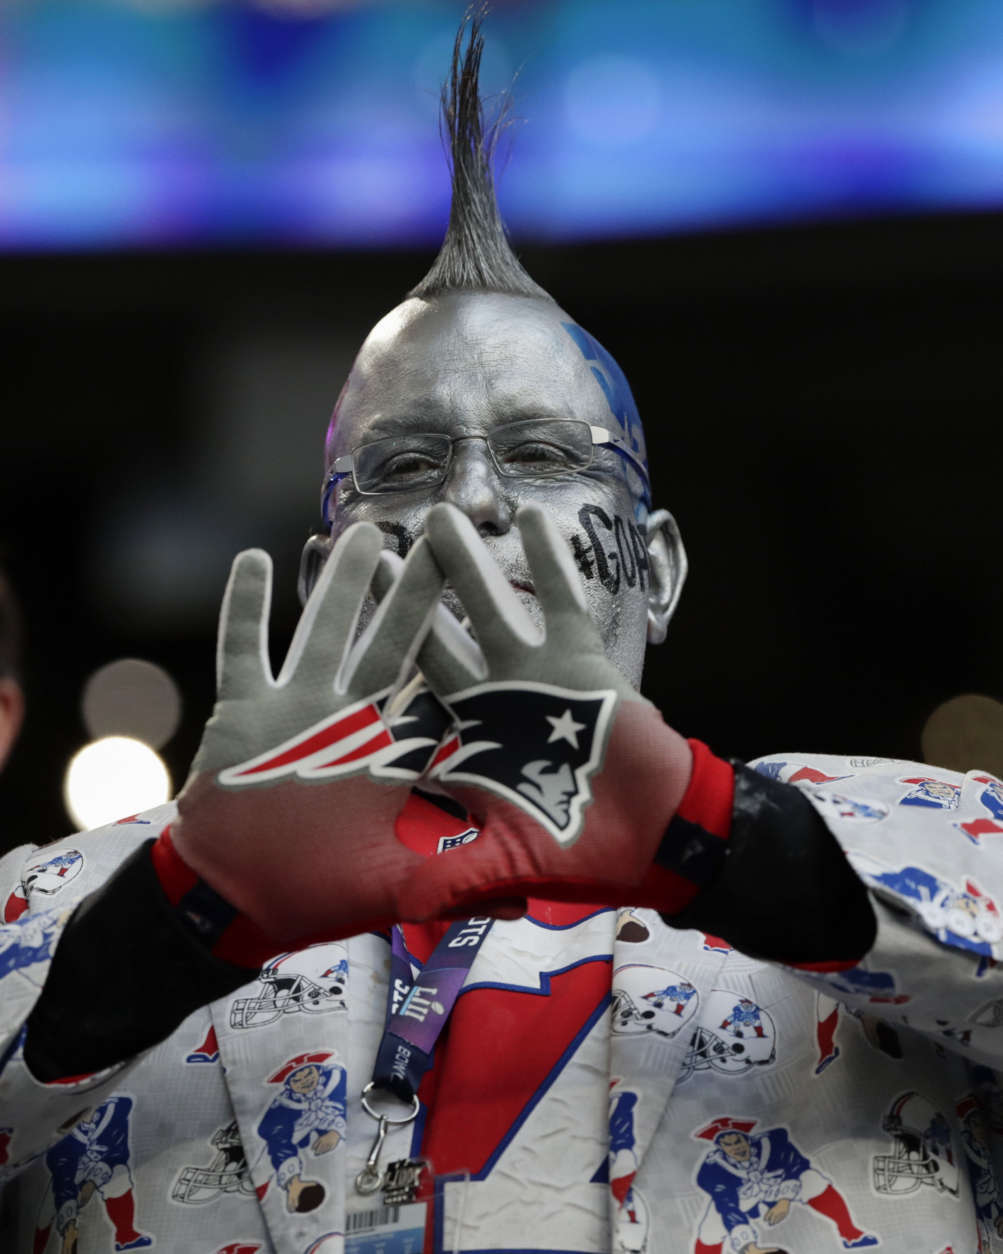 A New England Patriots fan poses before the NFL Super Bowl 52 football game against the Philadelphia Eagles, Sunday, Feb. 4, 2018, in Minneapolis. (AP Photo/Frank Franklin II)